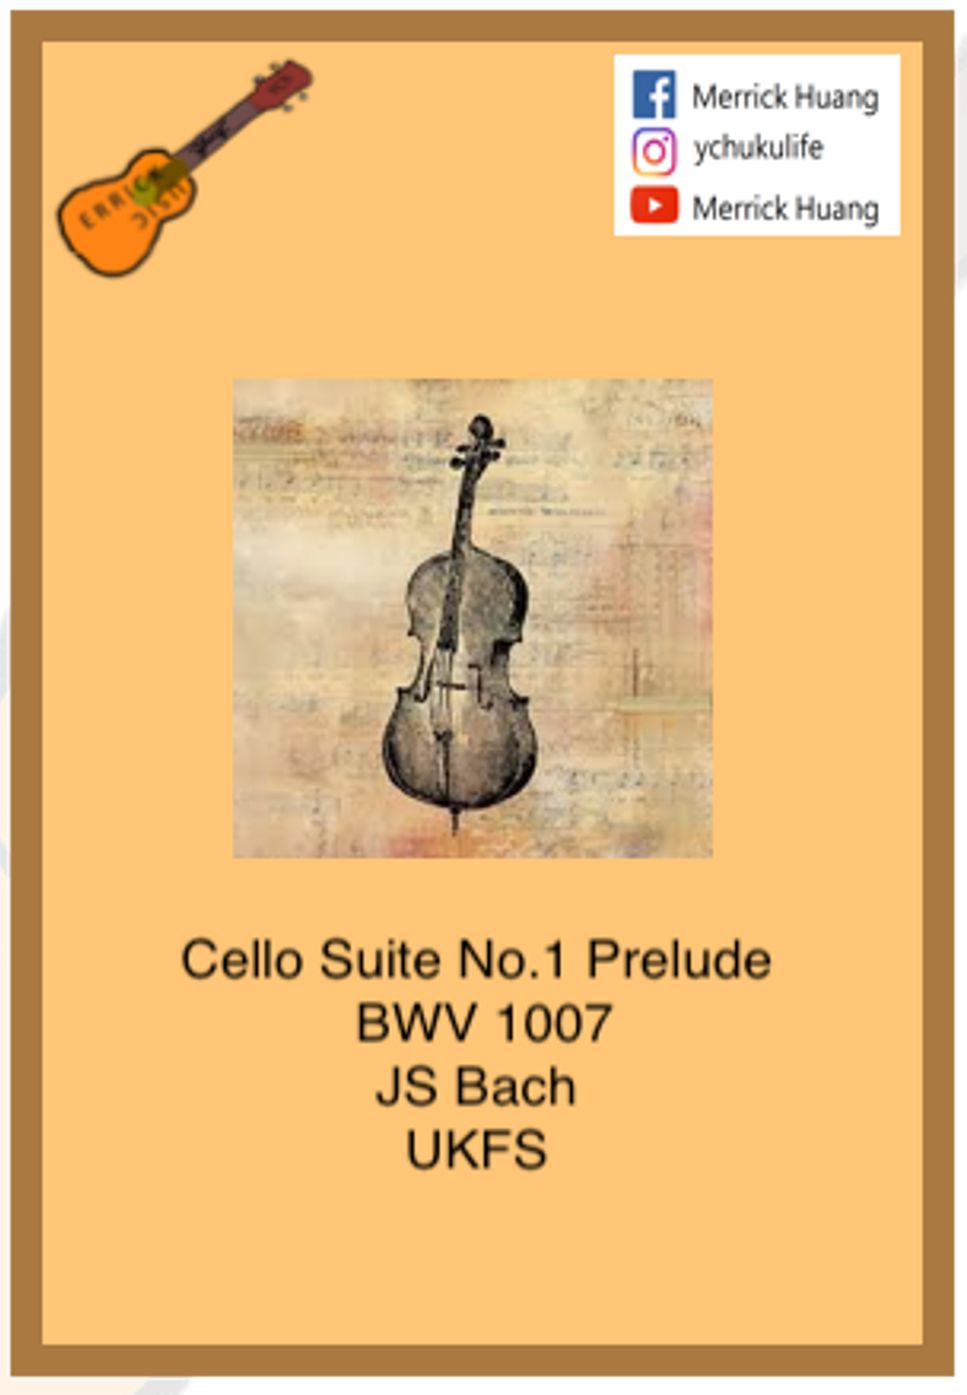 JS Bach - Cello Suite No.1 Prelude BWV 1007 by Merrick